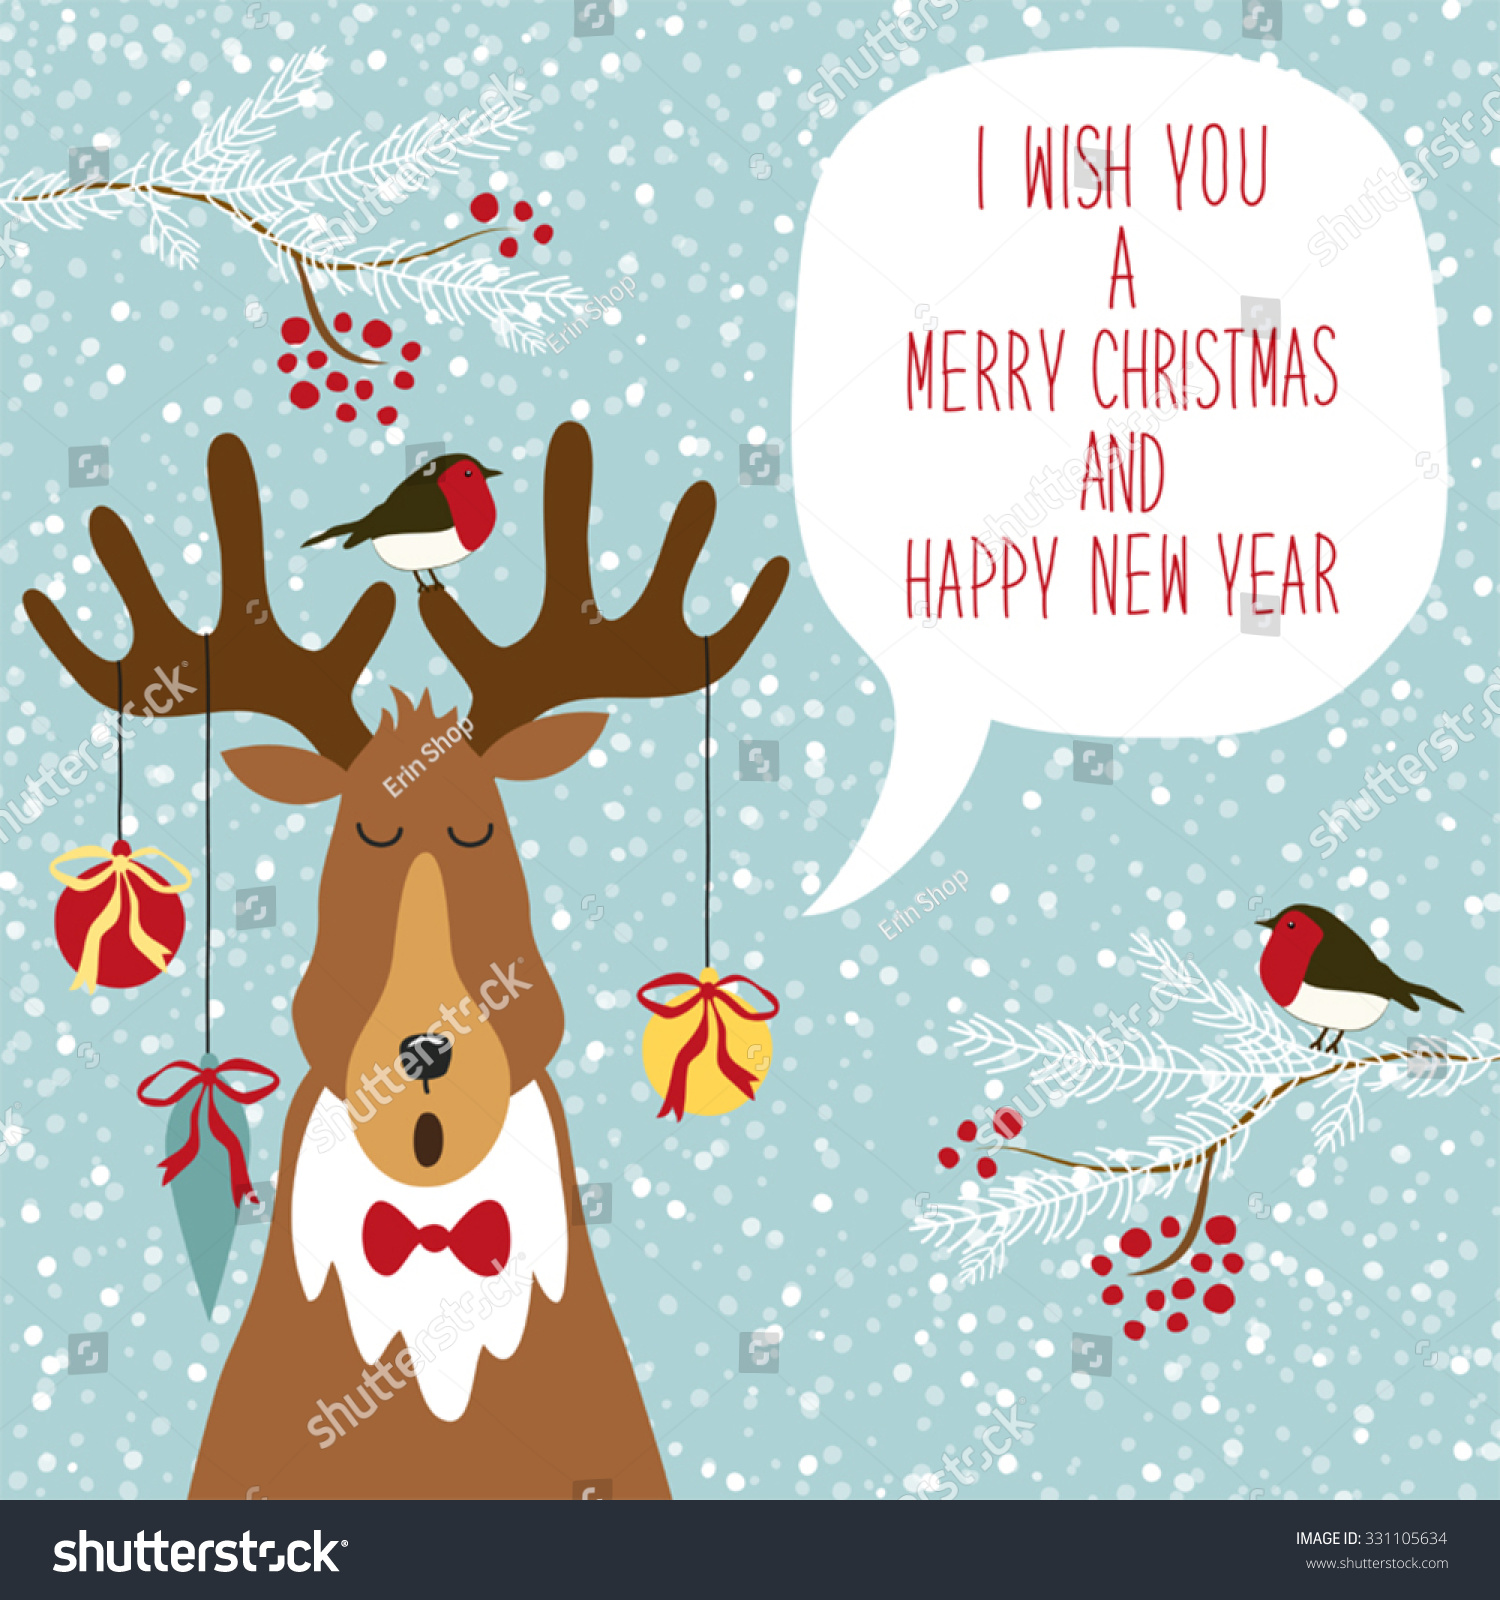 Cute Hand Drawn Reindeer Singing Traditional Song I Wish You A Merry Christmas And Happy New ...